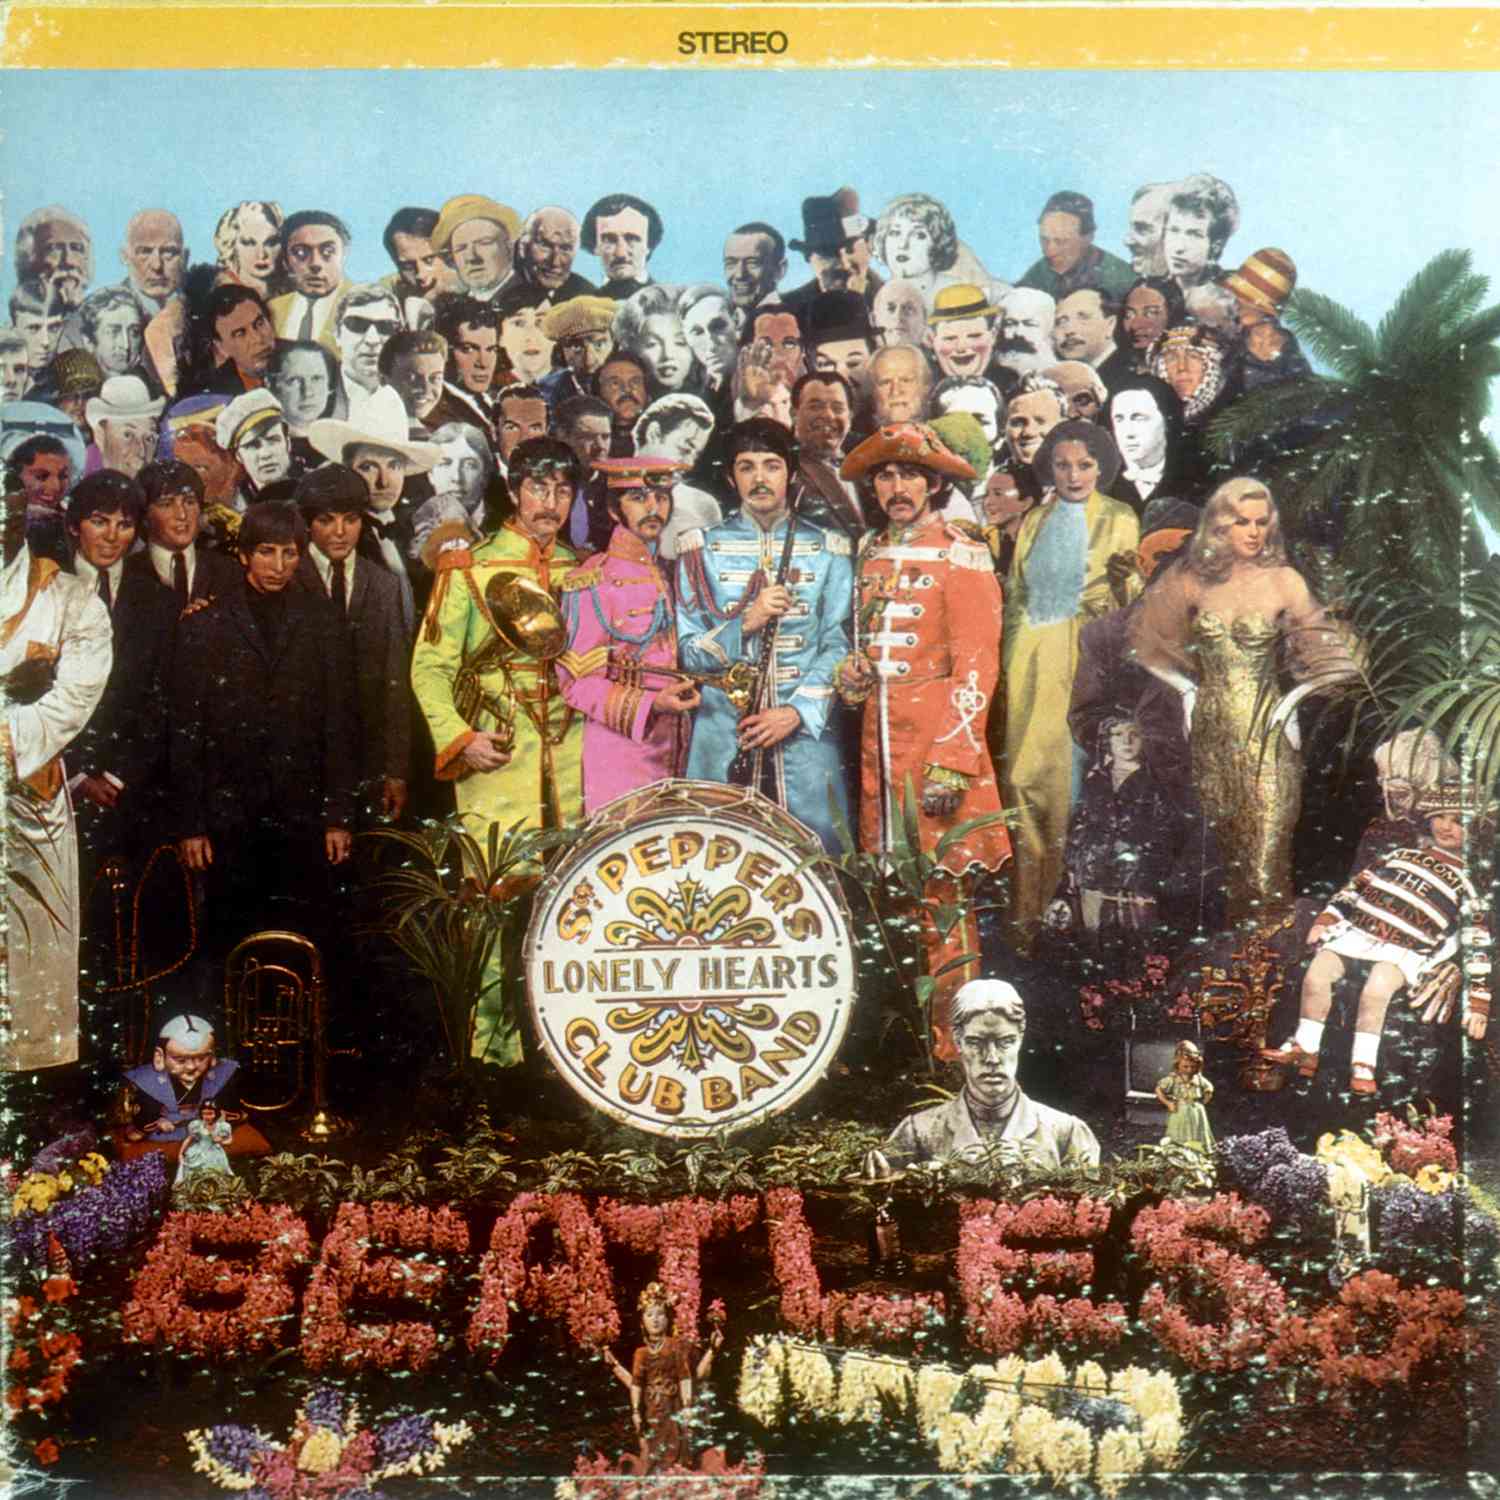 Album cover designed by art director Robert Fraser for rock and roll band "The Beatles" album entitled "Sgt. Pepper's Lonely Hearts Club Band" which was released on June 1, 1967